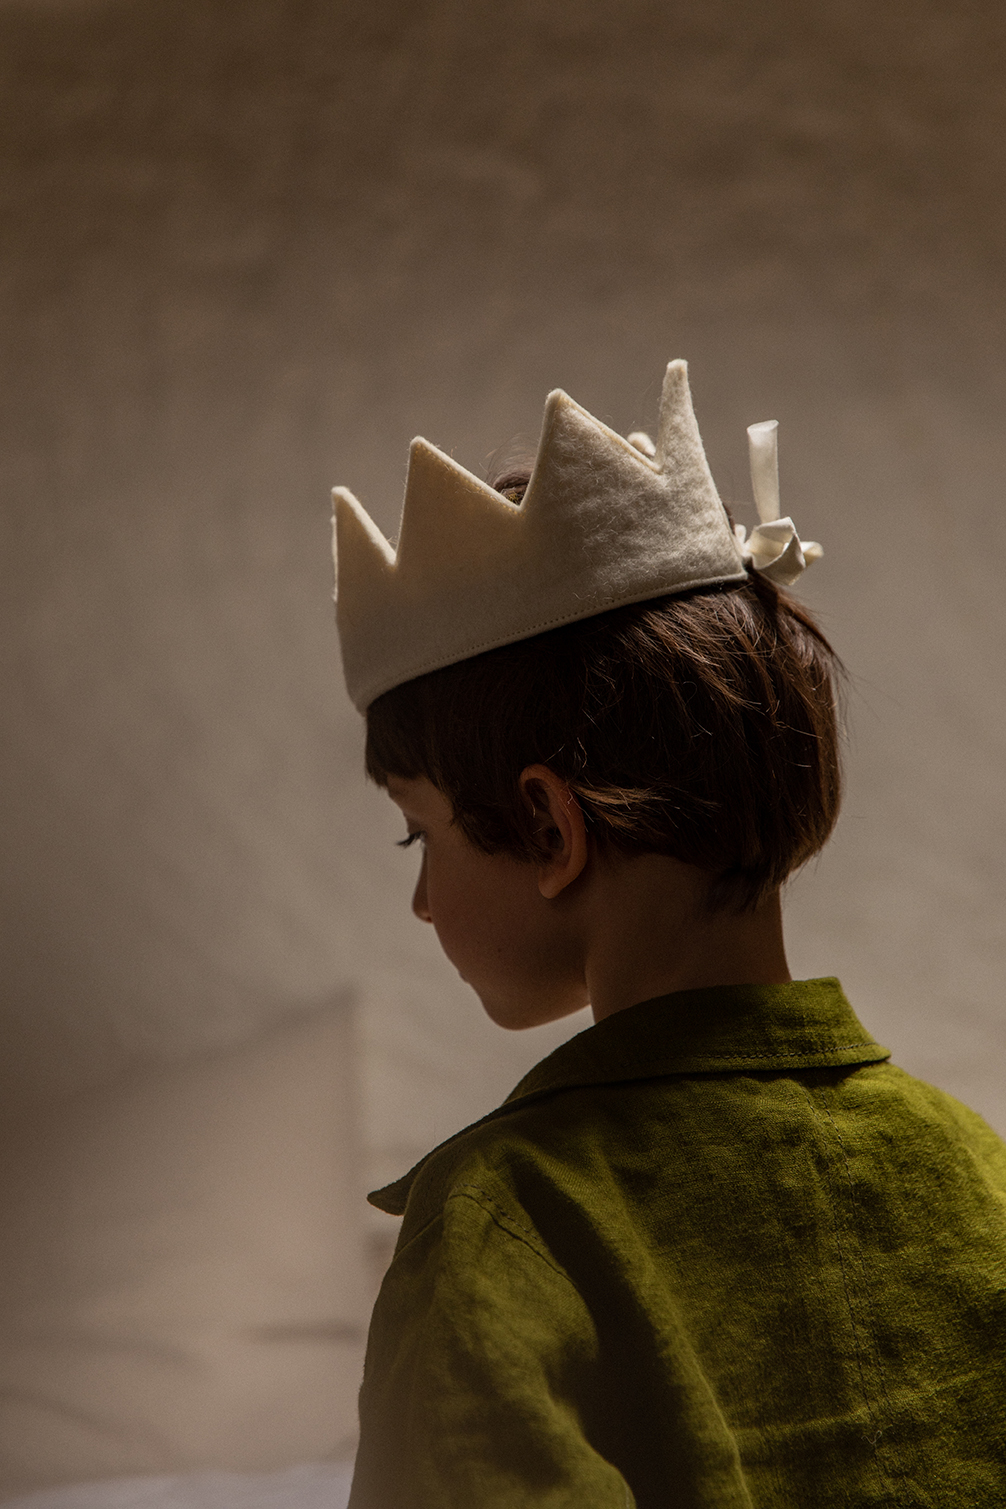 Little boy from the back with a white felt crown on his head